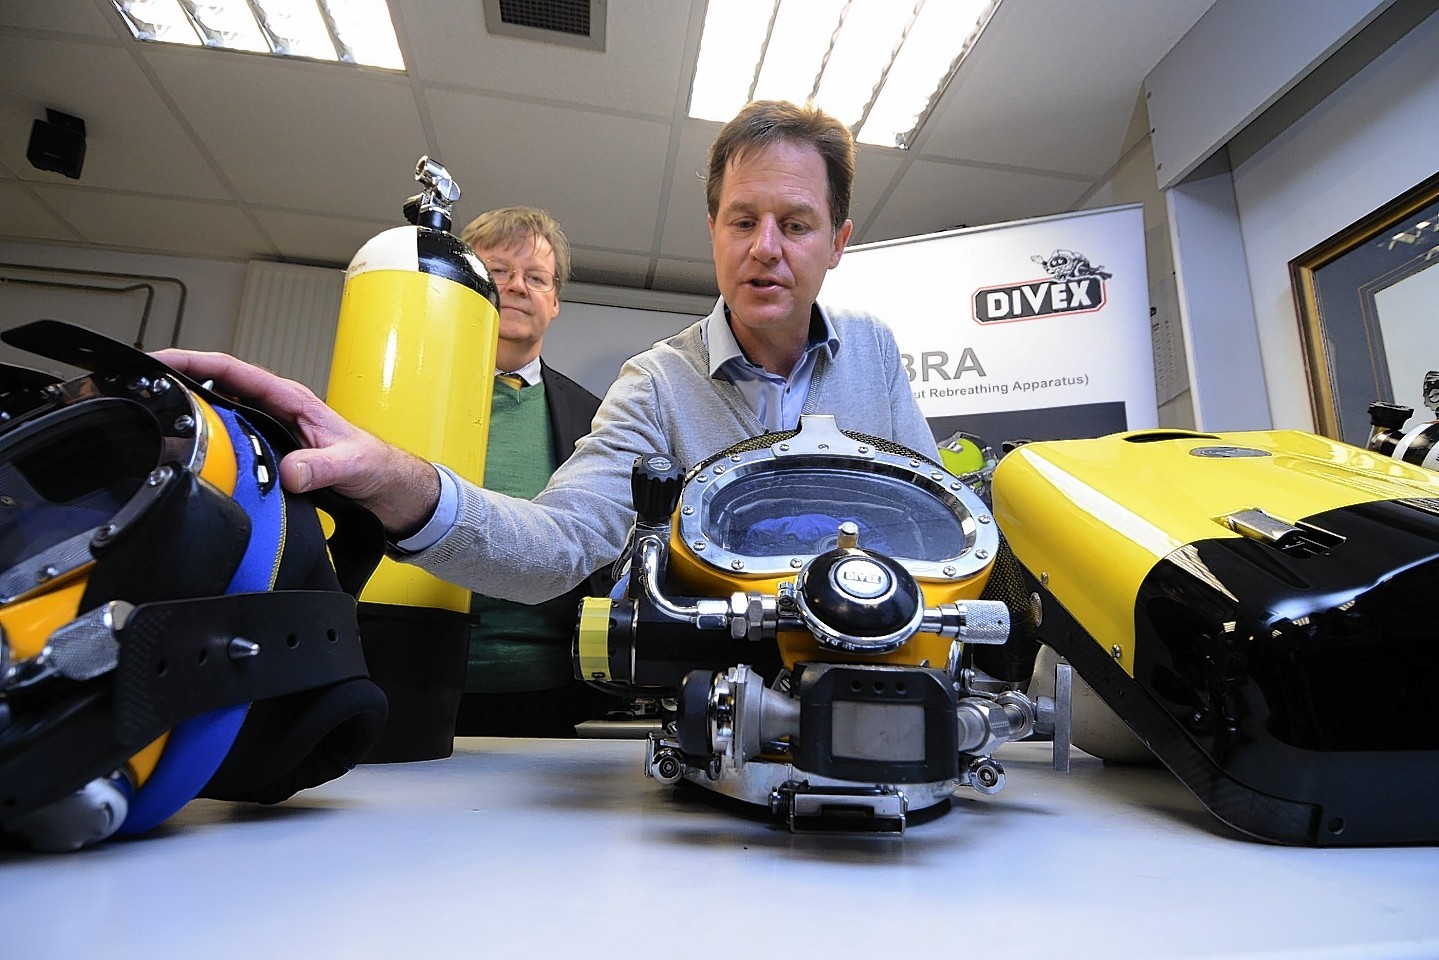 Deputy Prime Minister and Lib Dem Leader Nick Clegg visiting Divex Global, who supply and manufacture diving and subsea equipment, in Westhill